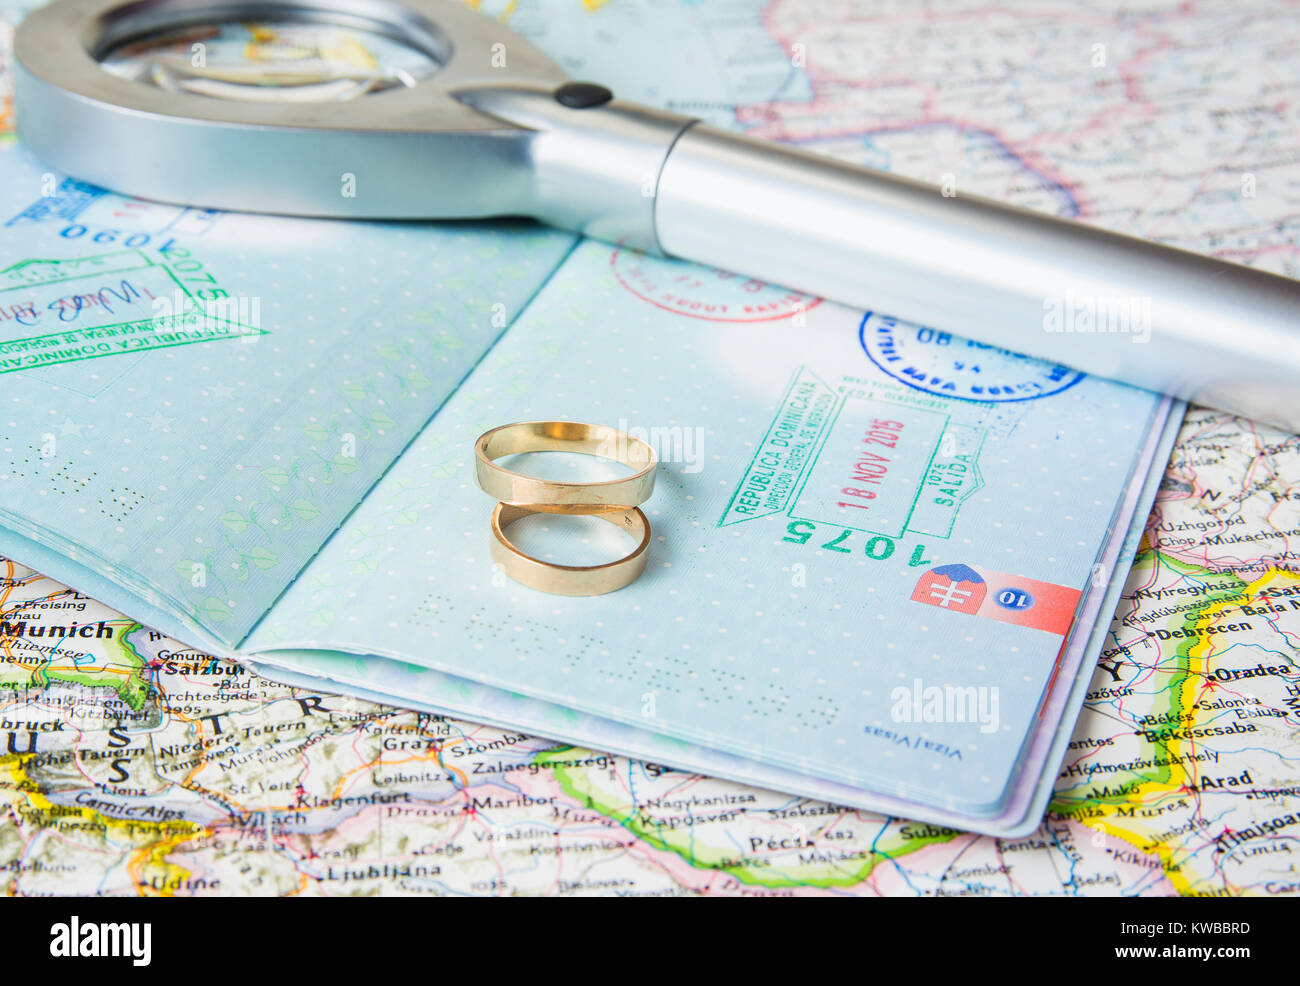 Honeymoon concept. Wedding rings with passports on the map. Stock Photo